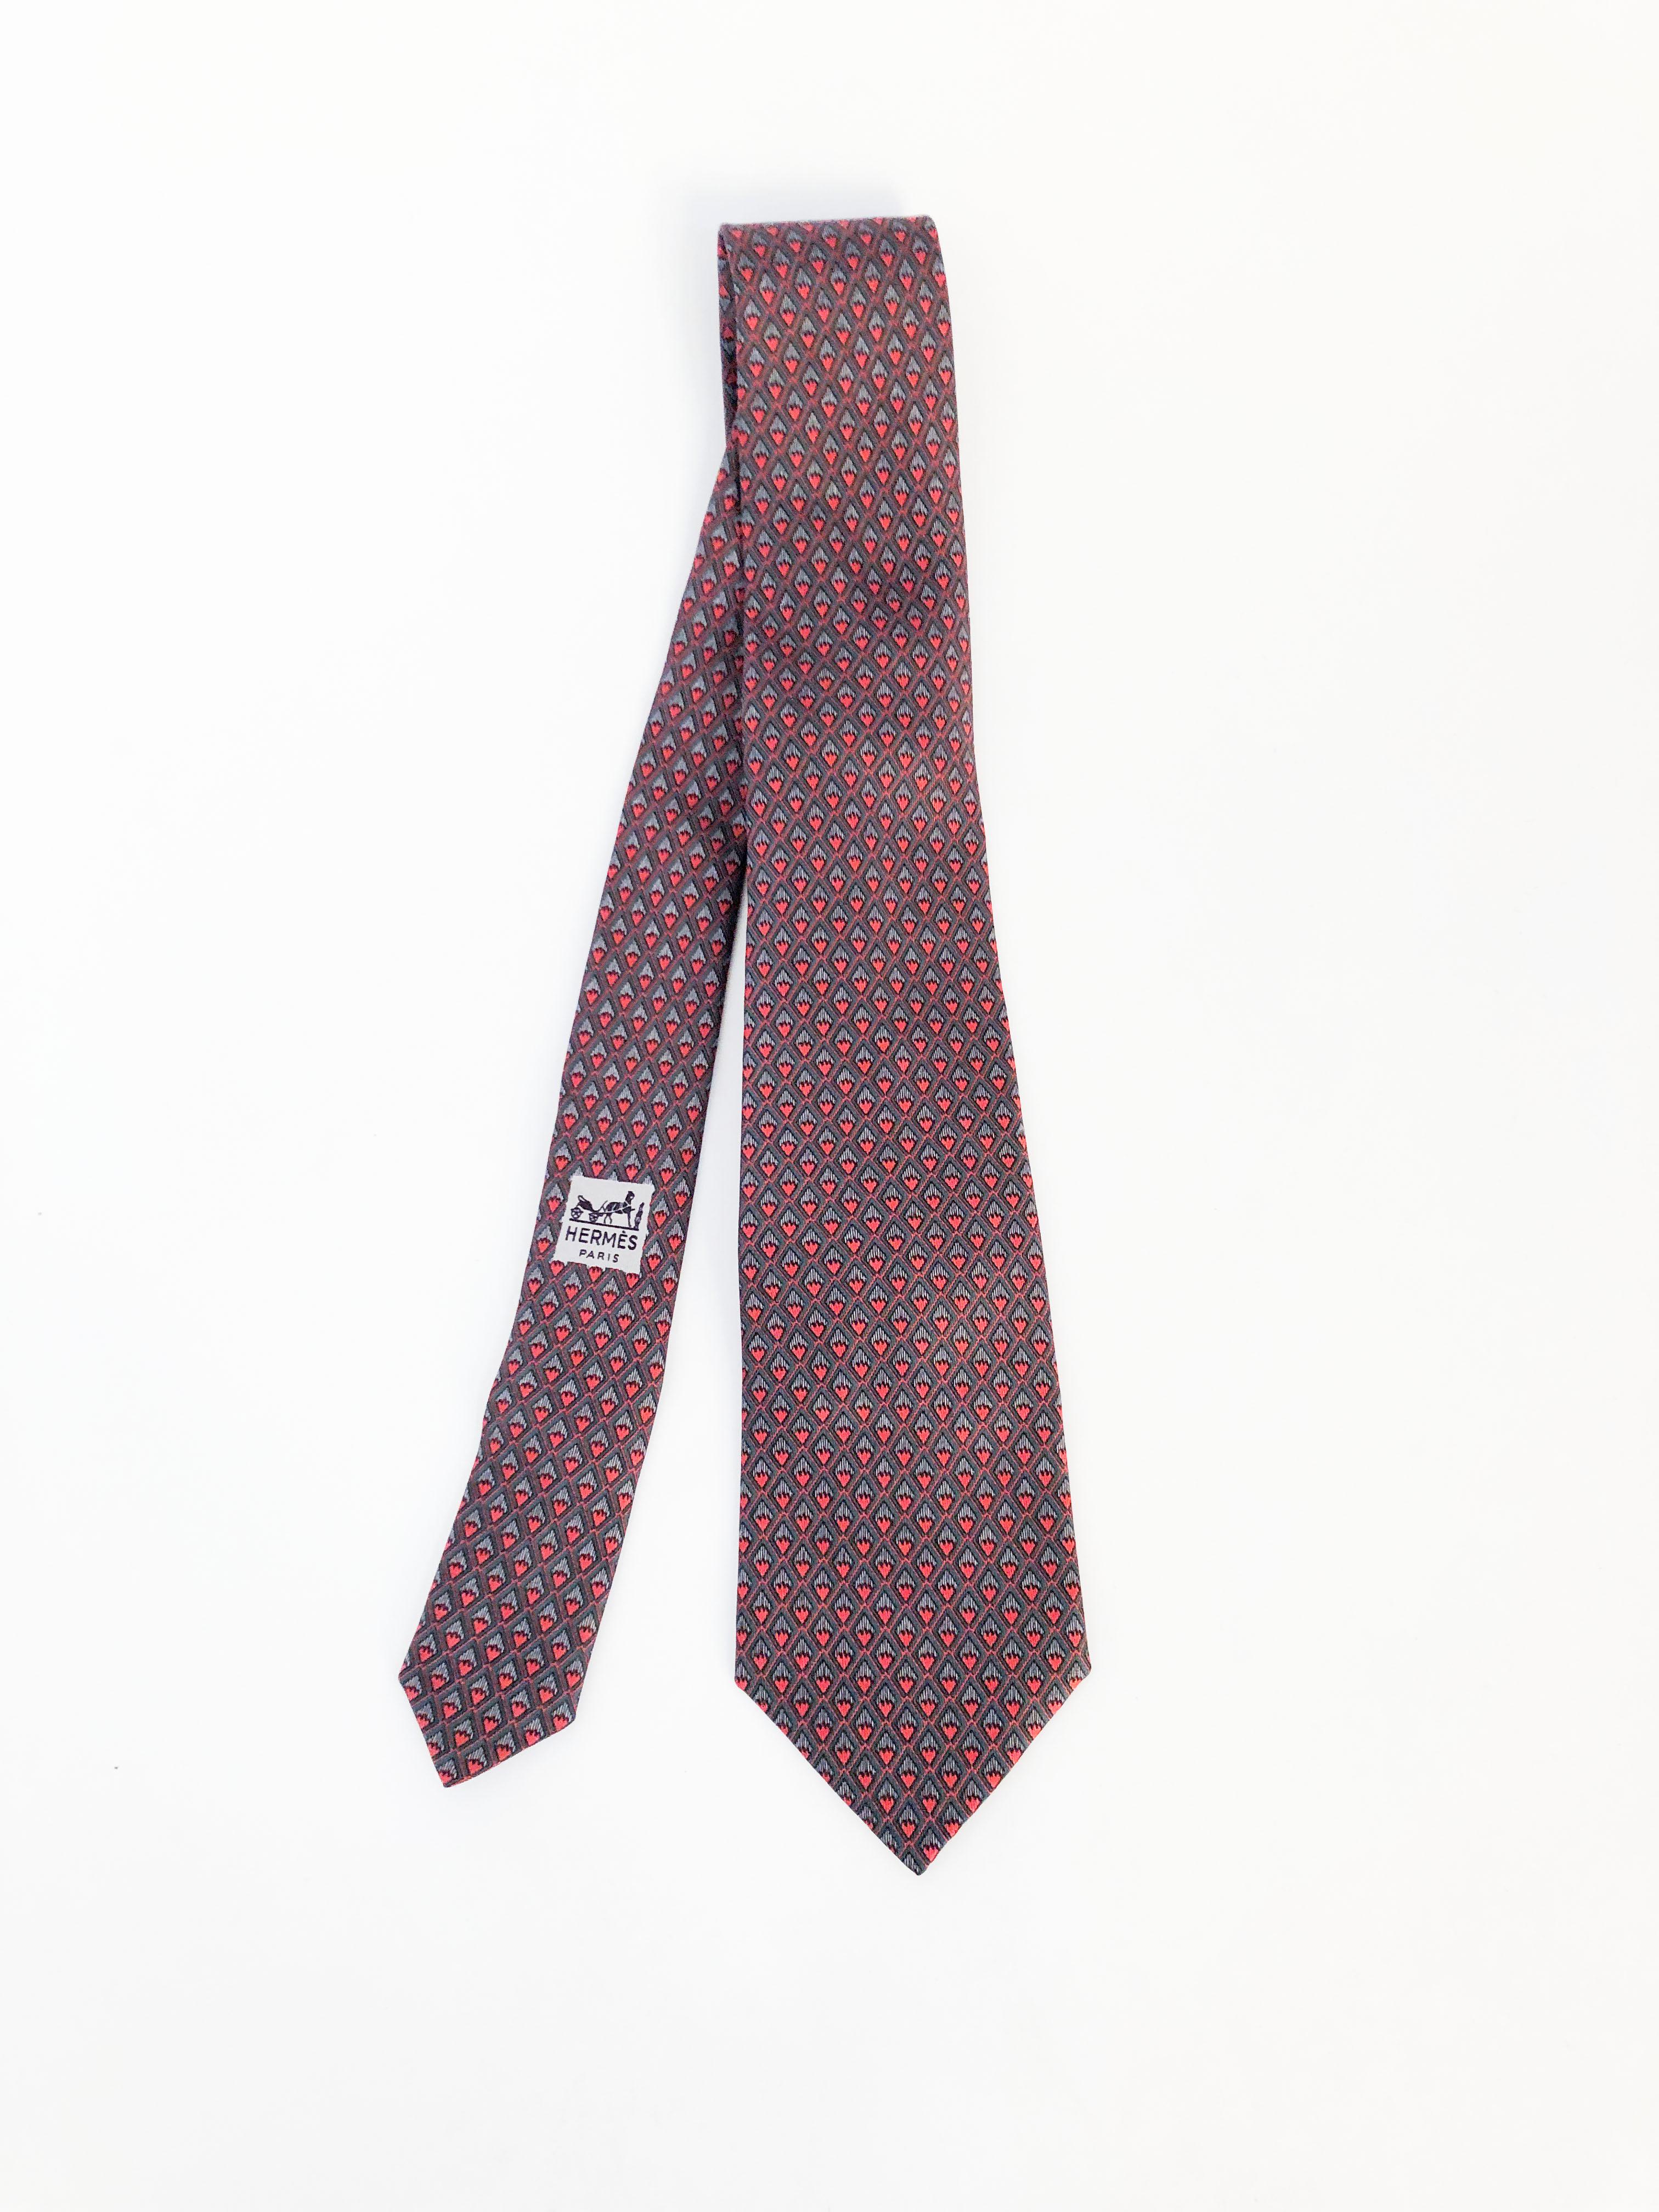 Hermès Silk Tie with Geometric Pattern featuring red, grey, green, and black diamonds pattern